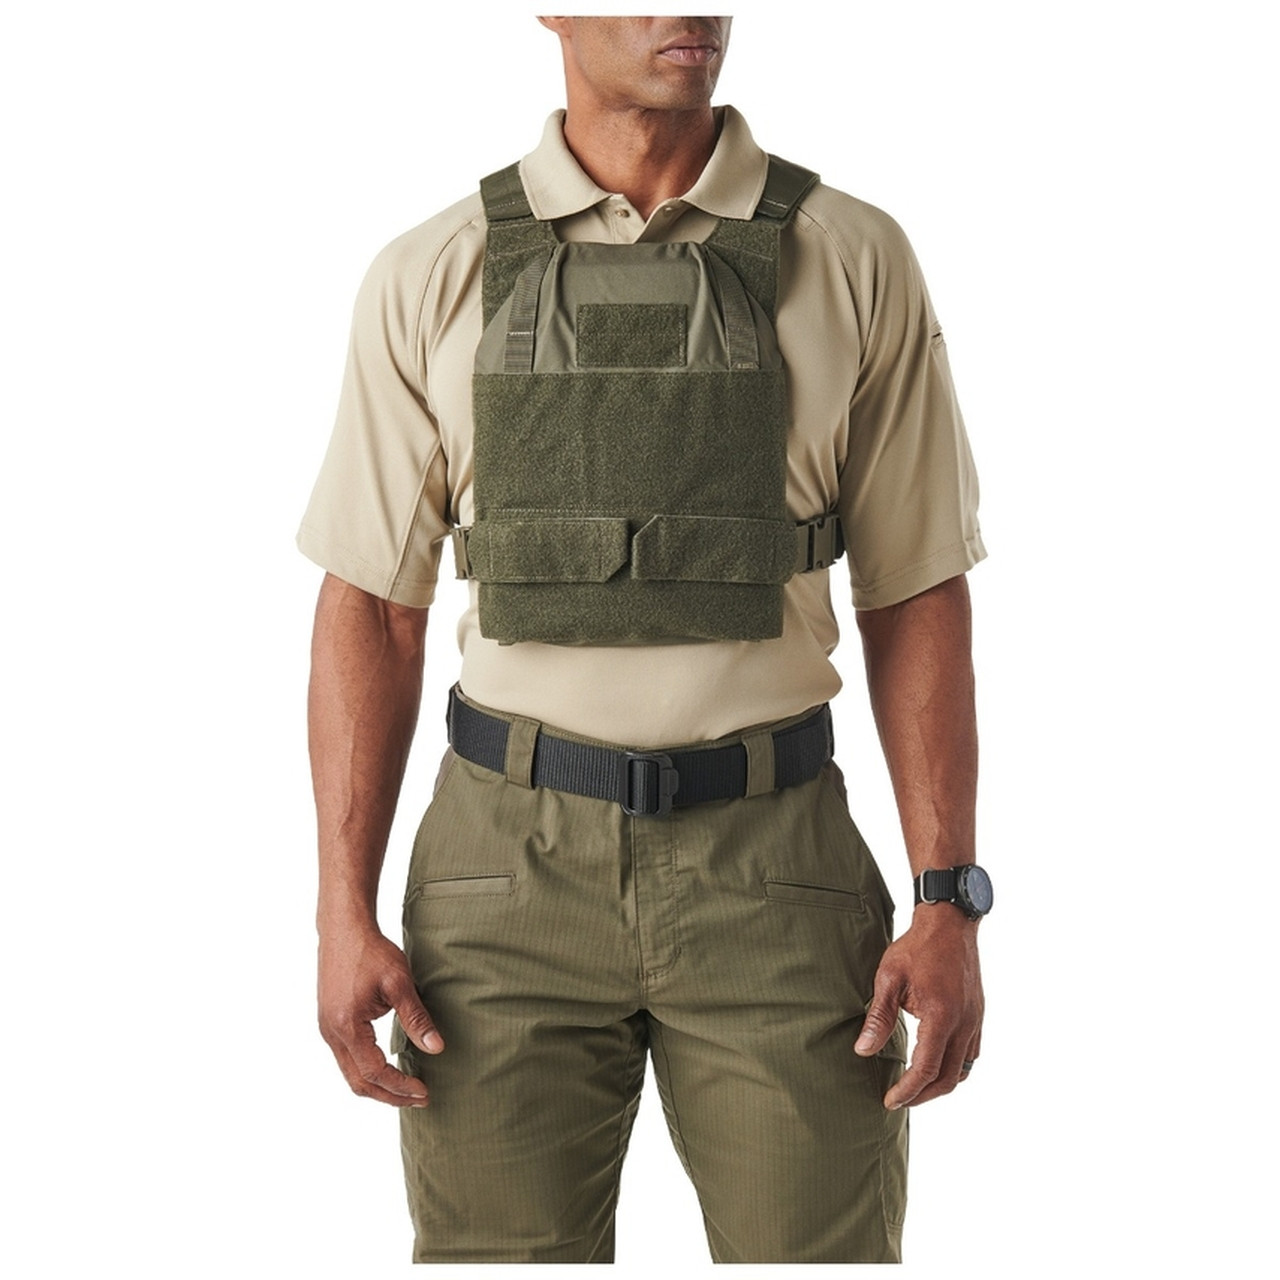 Prime Plate Carrier by 5.11 Tactical buy with delivery to the USA 